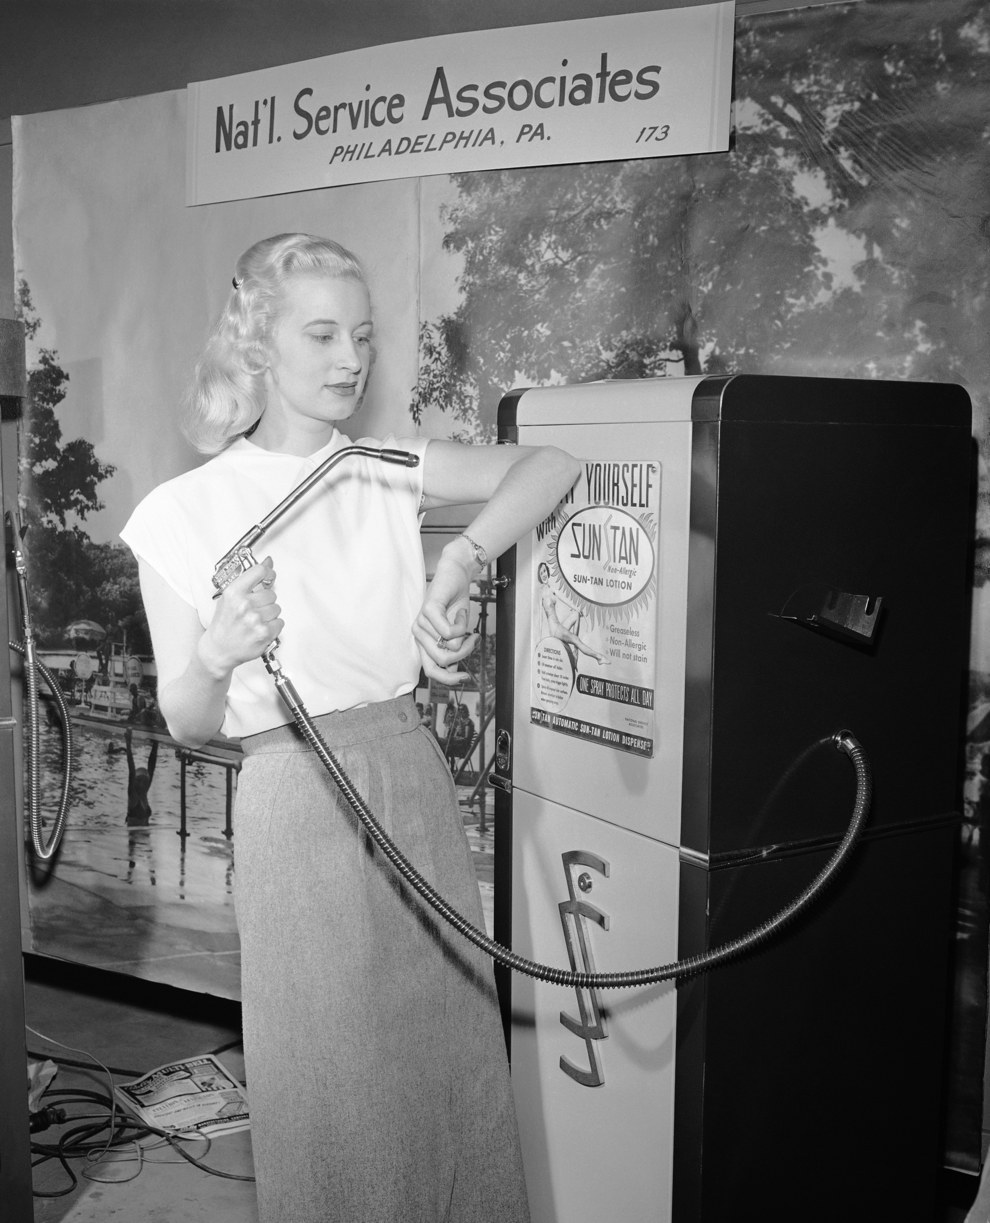 A dime could get you a 30 second spray tan from a vending machine in 1949.